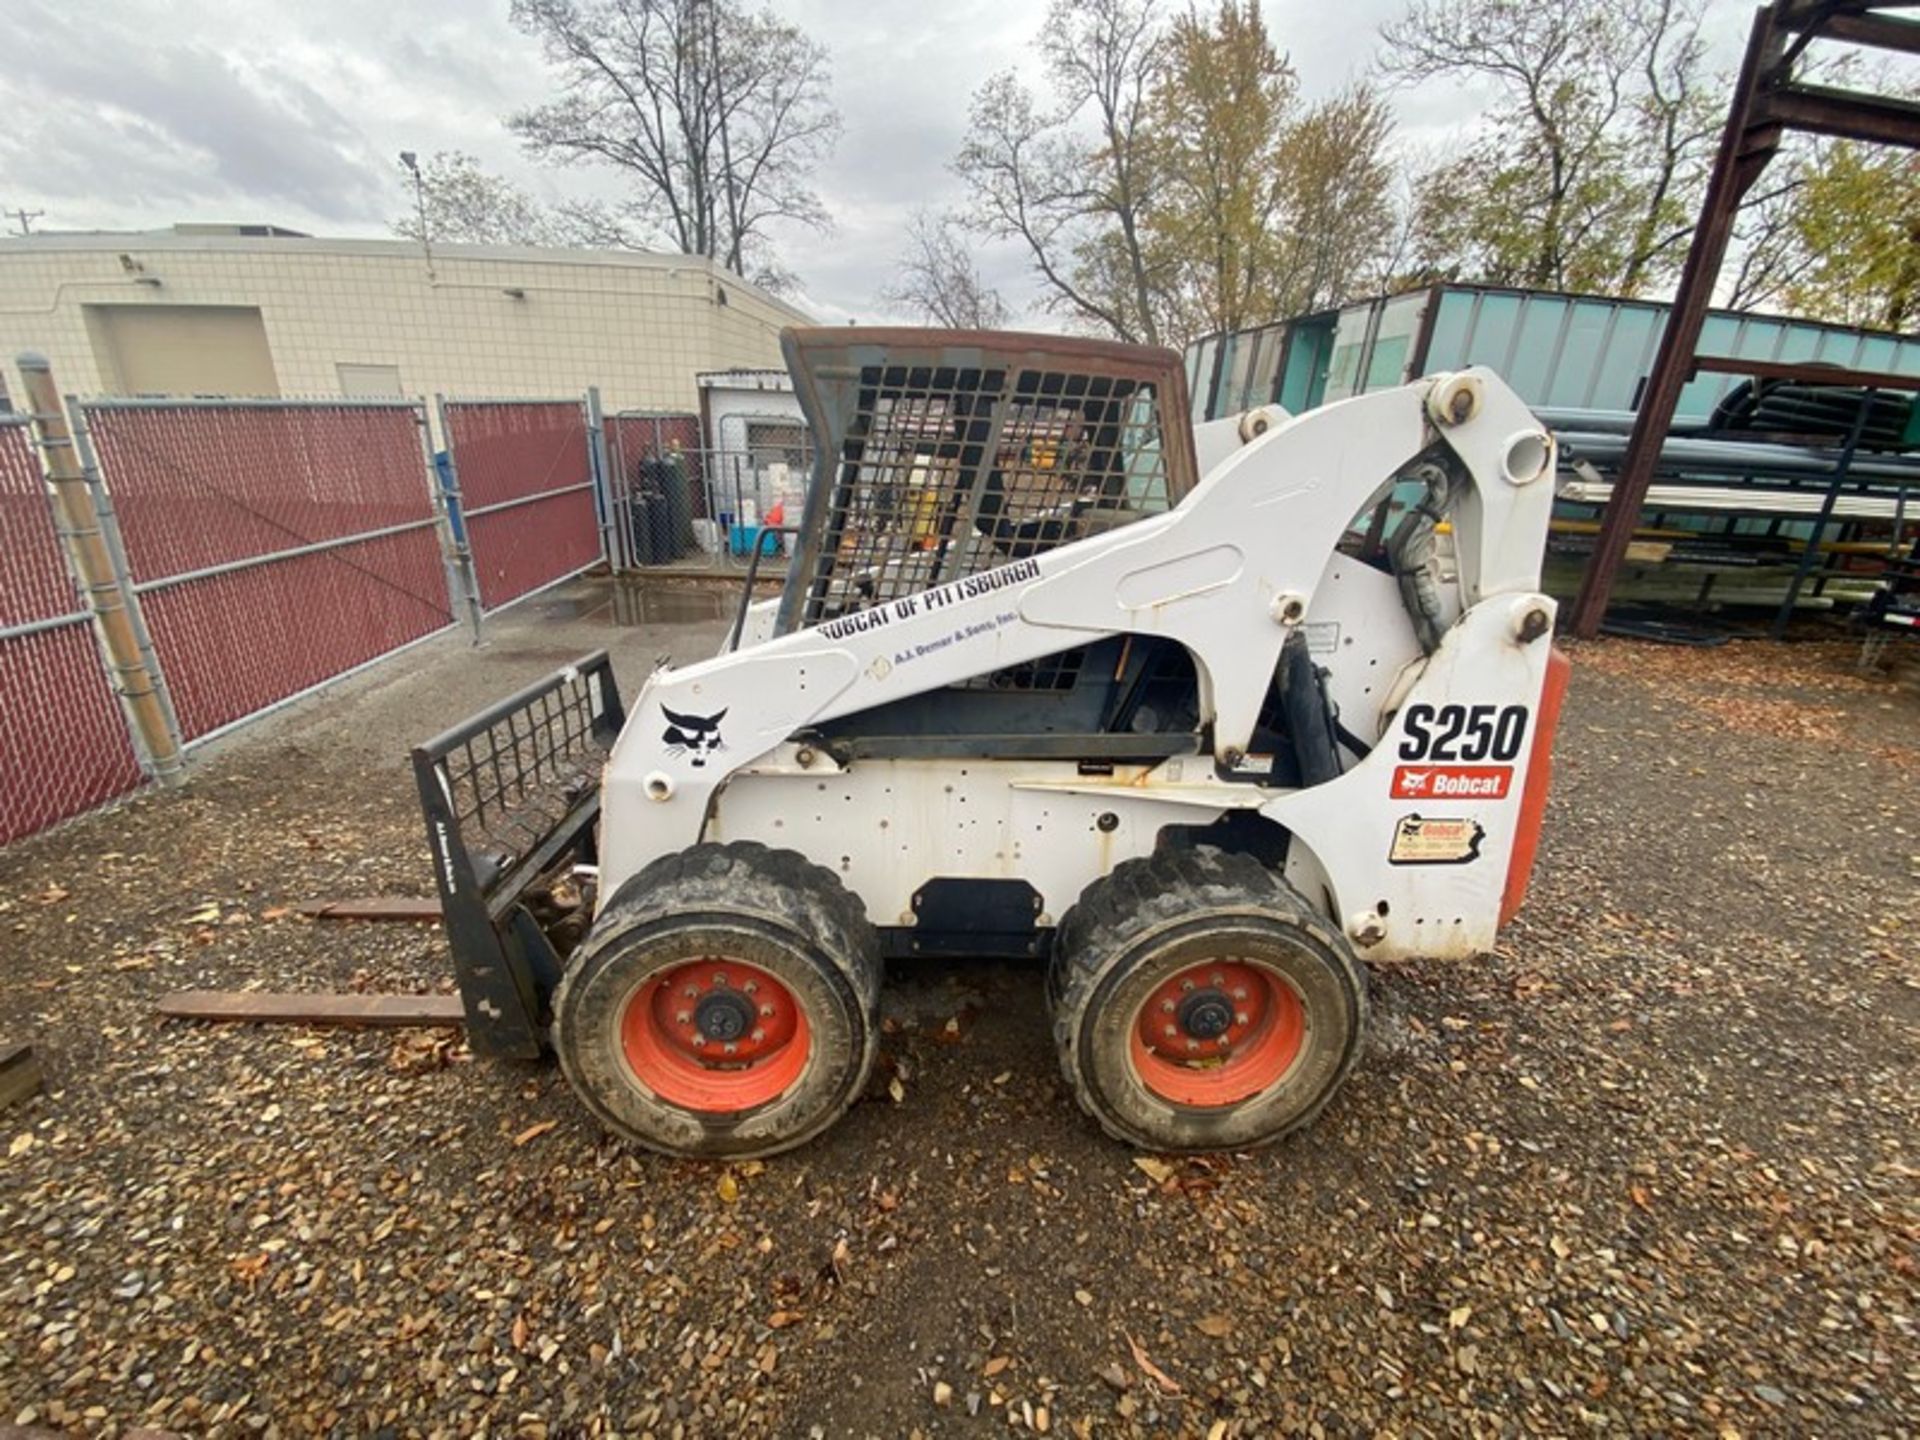 2010 Bobcat S250 Compact Skid Steer, VIN#: A5GM36985, with Fork Attachment (NOTE: DELAYED REMOVAL - Image 10 of 12